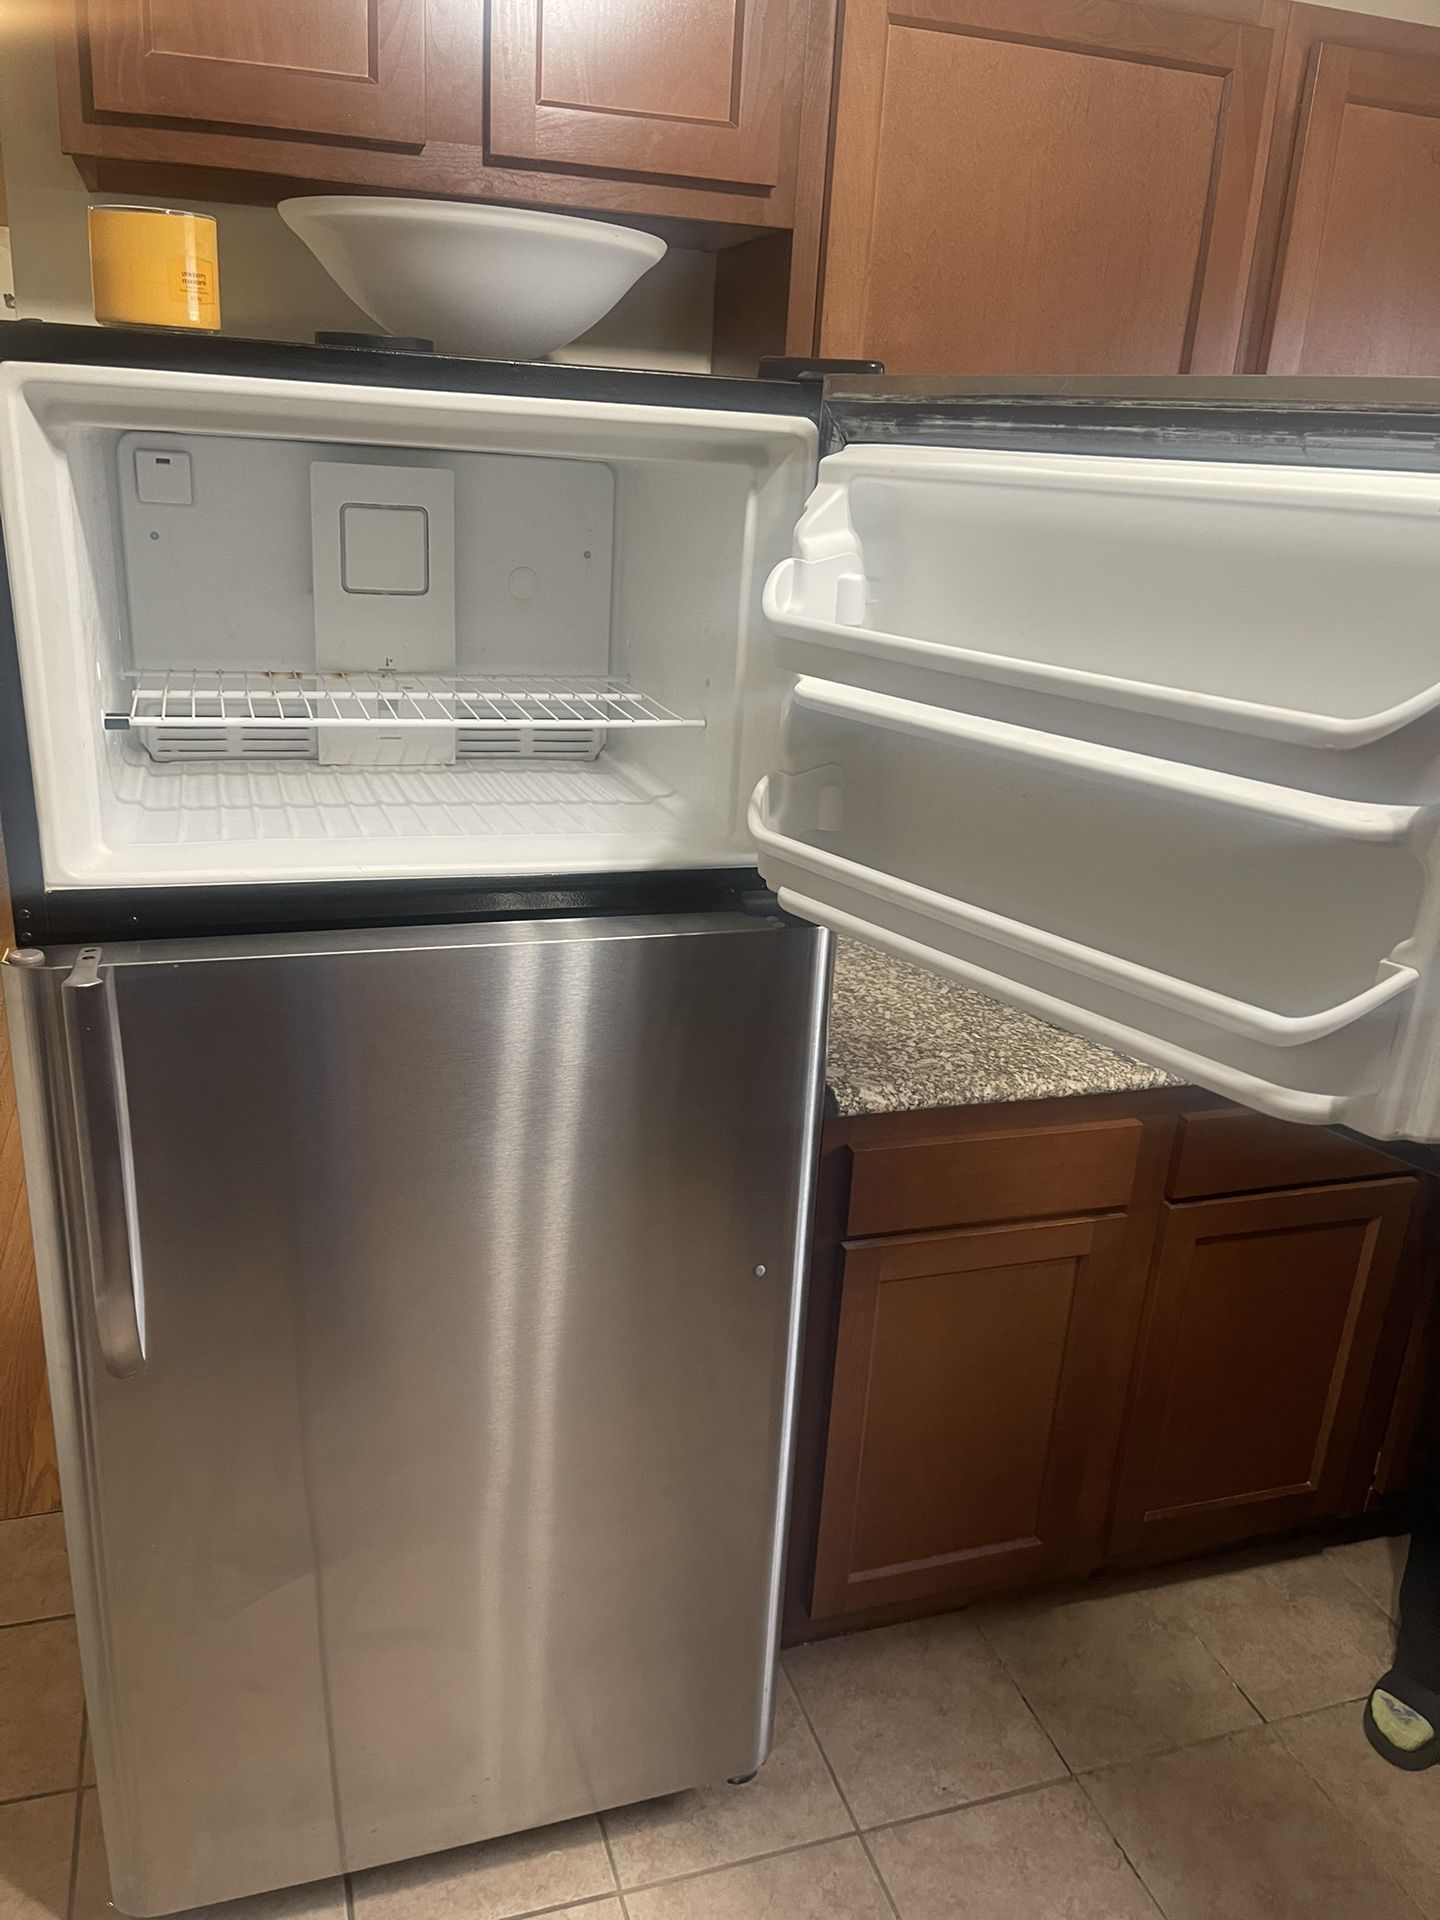 Refrigerator Also Have Matching Stove Microwave And Dishwasher